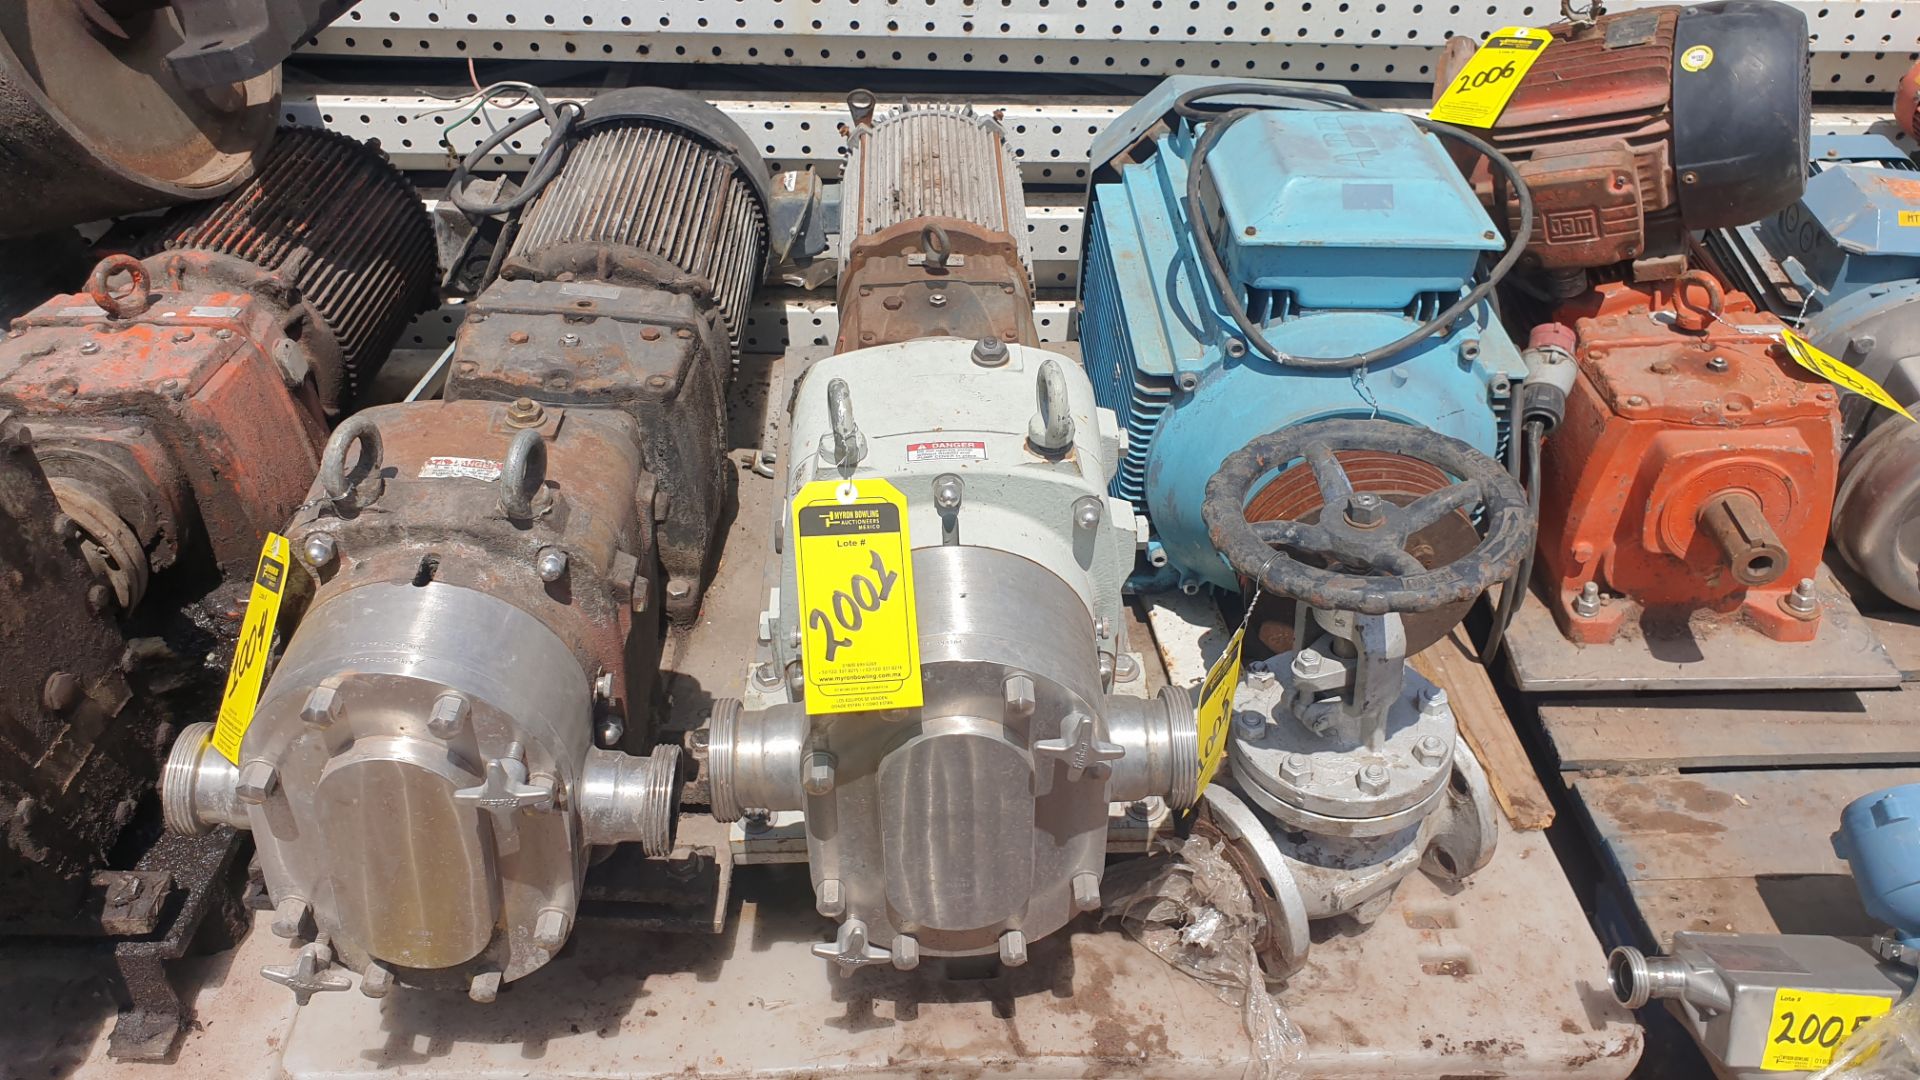 1 Fristam Lobe pump, serial number 95011208-4283, includes emerson 10hp motor - Image 3 of 22